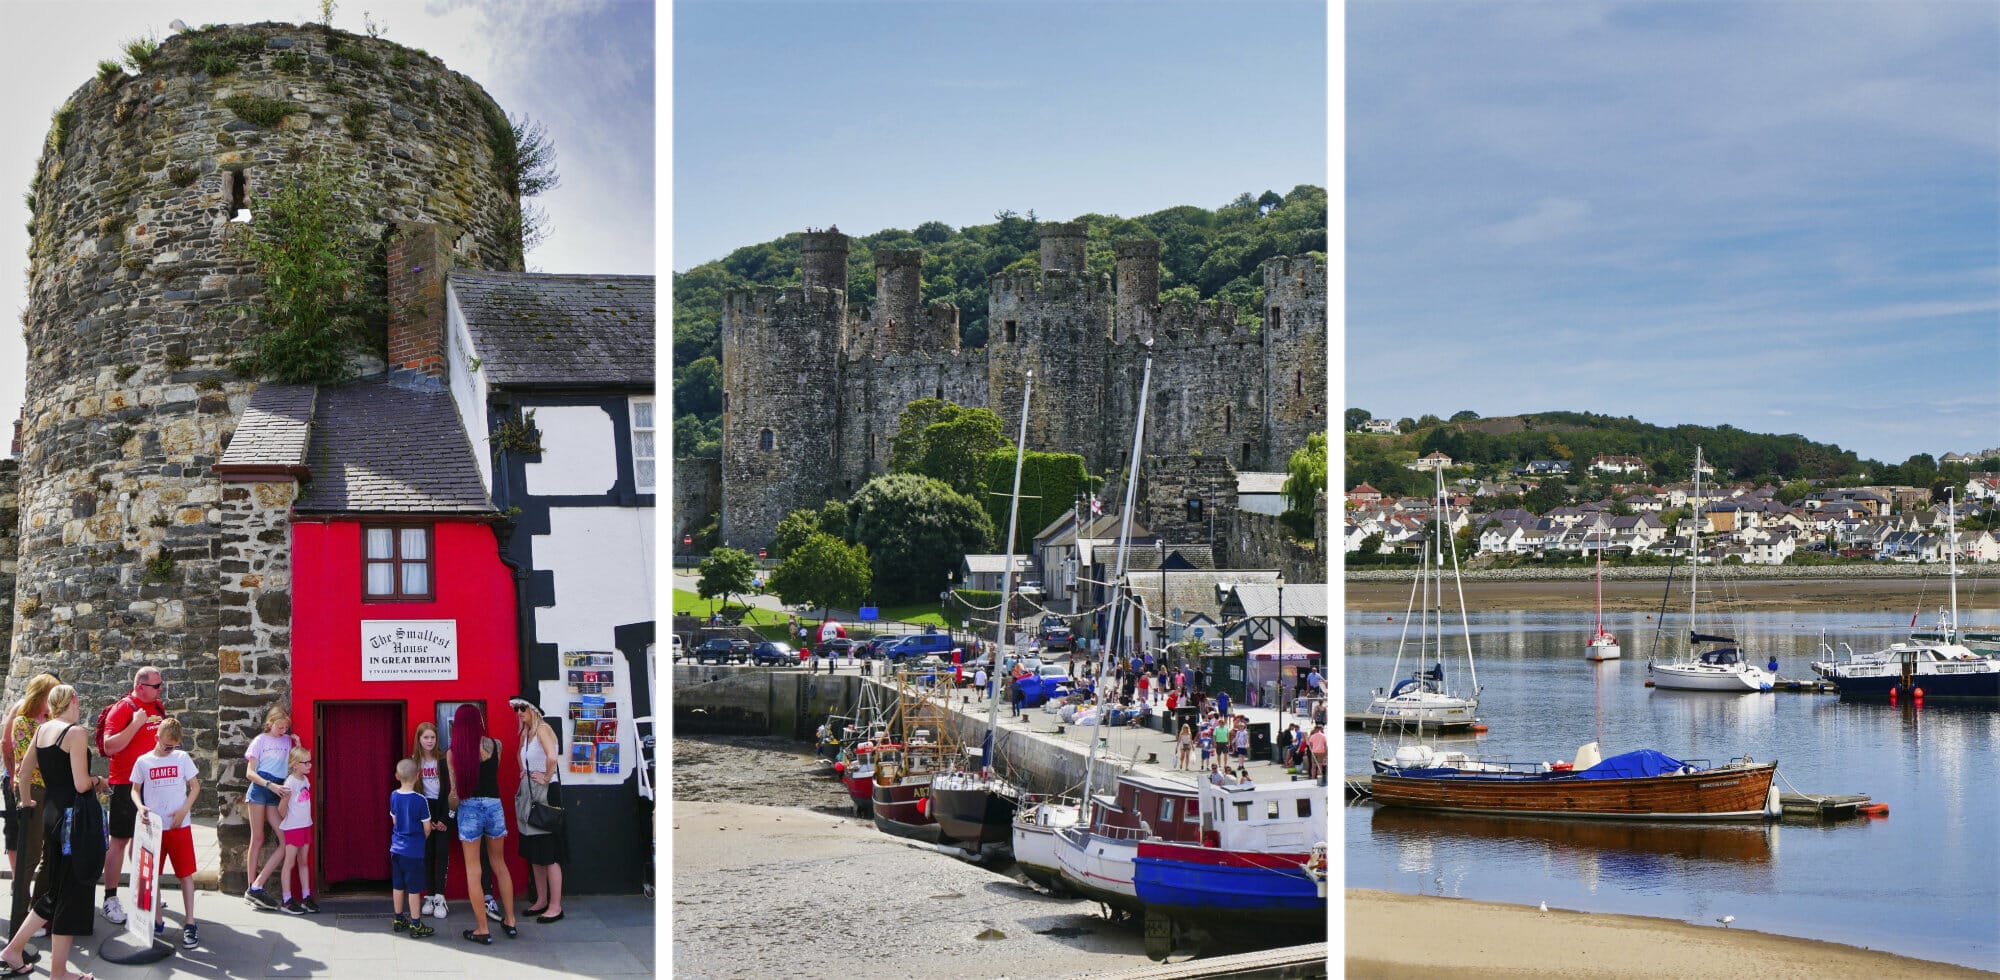 9+ Scenic Things to Do in Conwy, Wales (+ beautiful photos!) via @girlsgonelondon